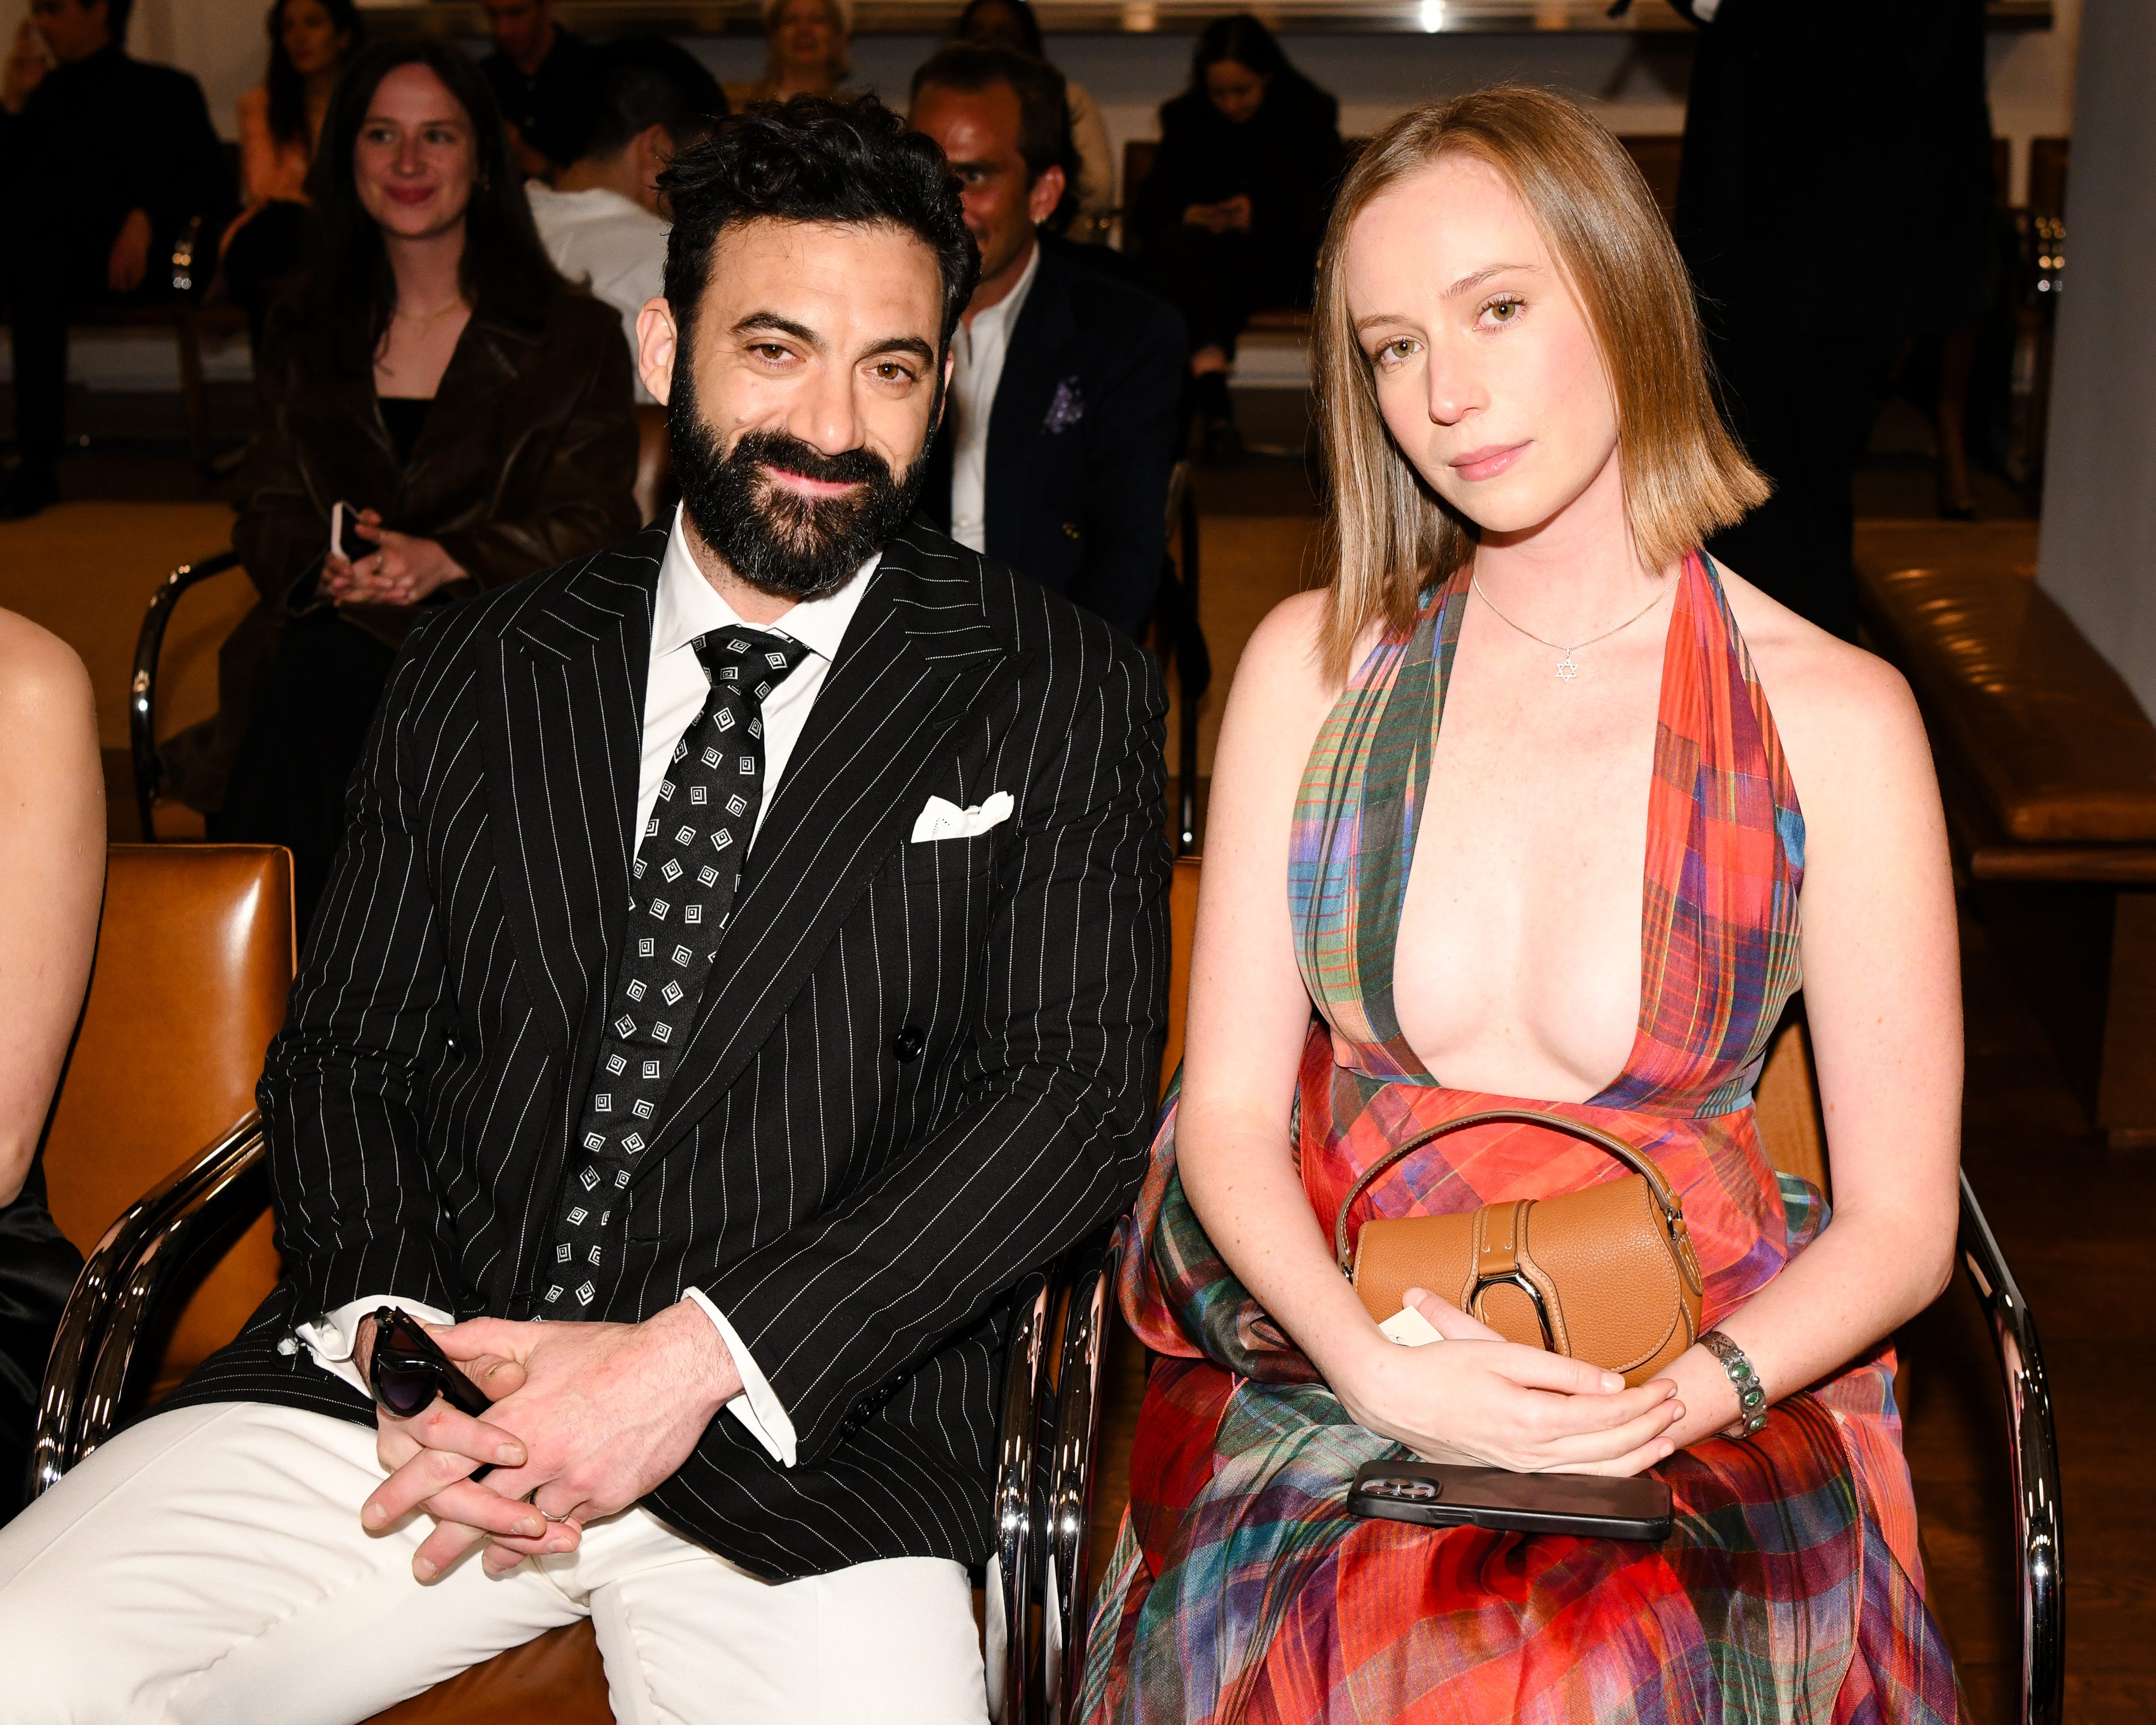 ralph lauren delivers intimate, starry fashion show with jessica chastain, glenn close, more